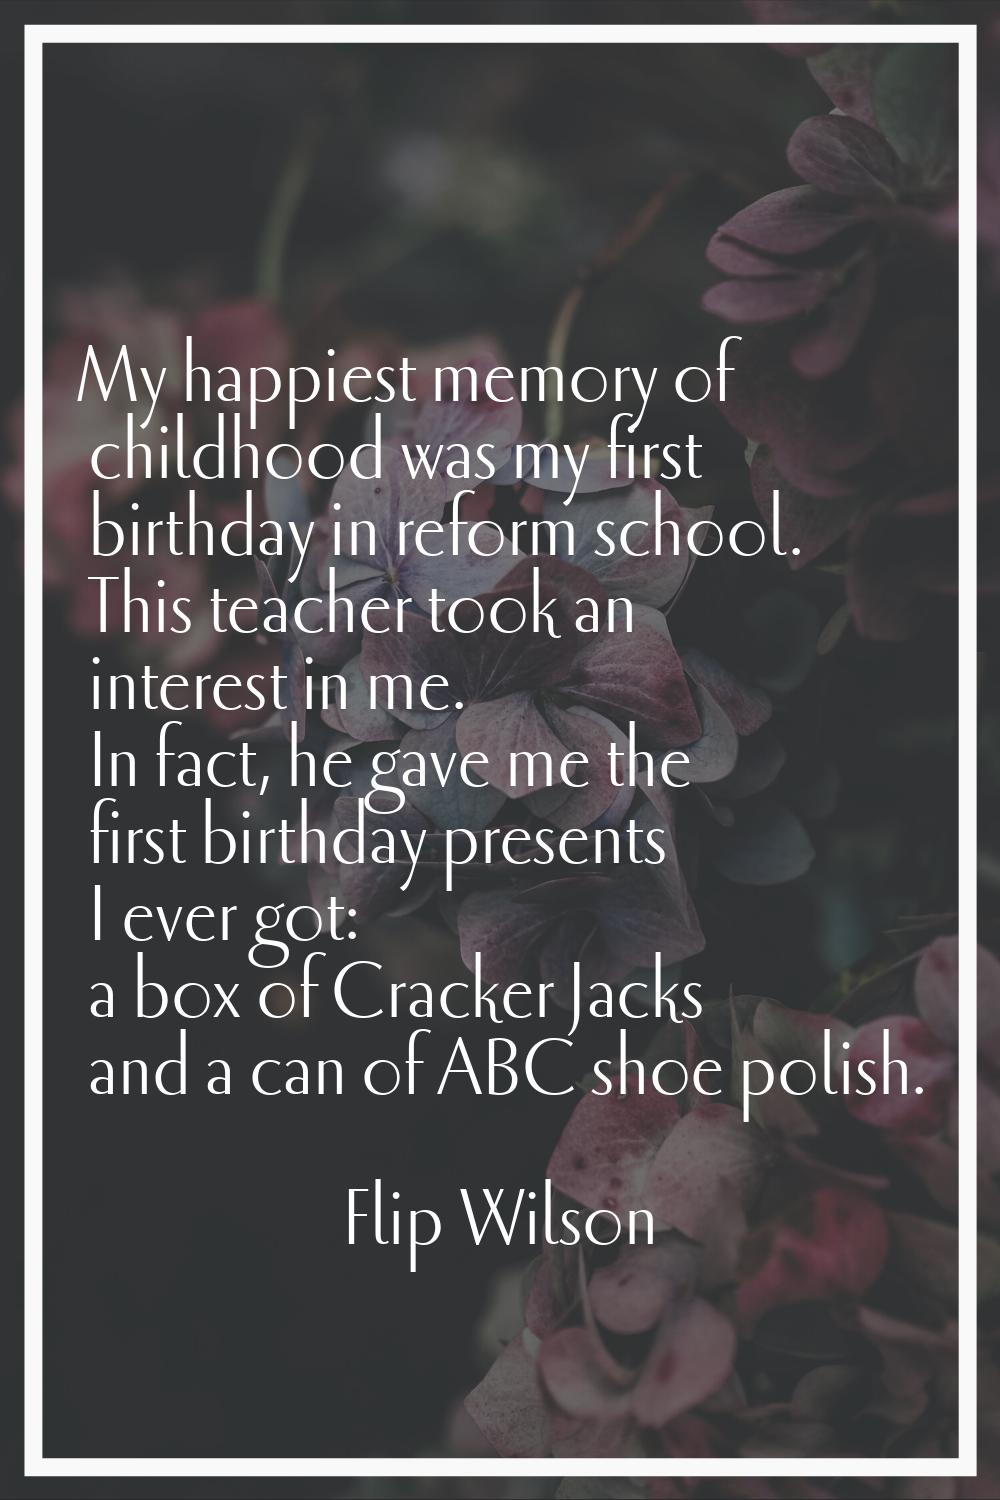 My happiest memory of childhood was my first birthday in reform school. This teacher took an intere